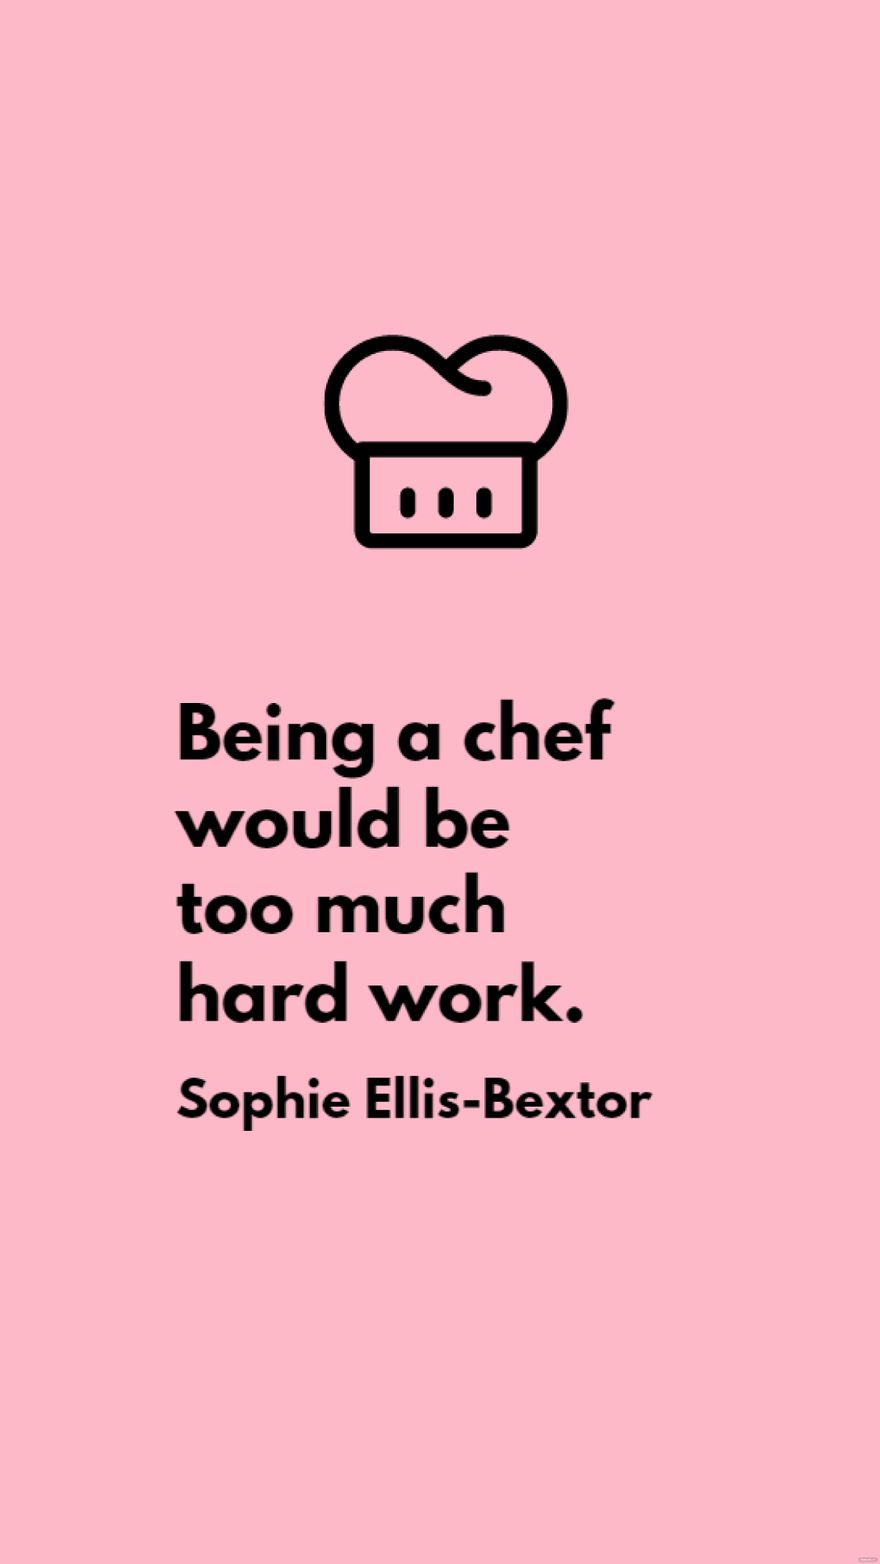 Free Sophie Ellis-Bextor - Being a chef would be too much hard work. in JPG